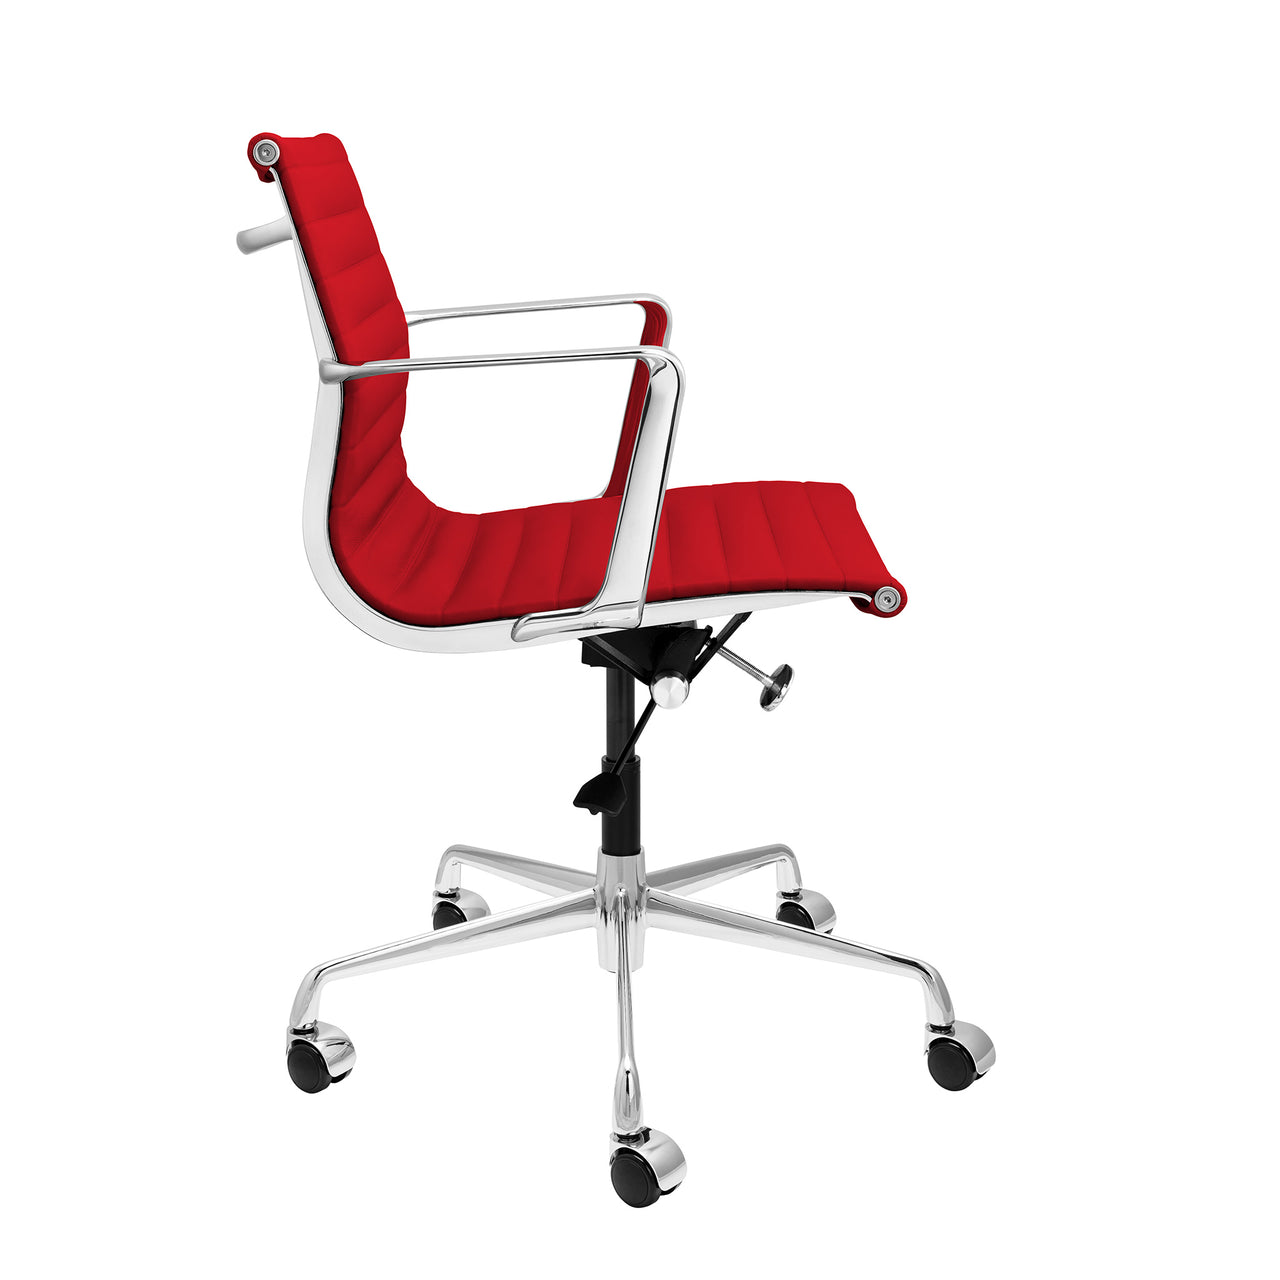 Pro Ribbed Management Chair (Red Italian Leather)